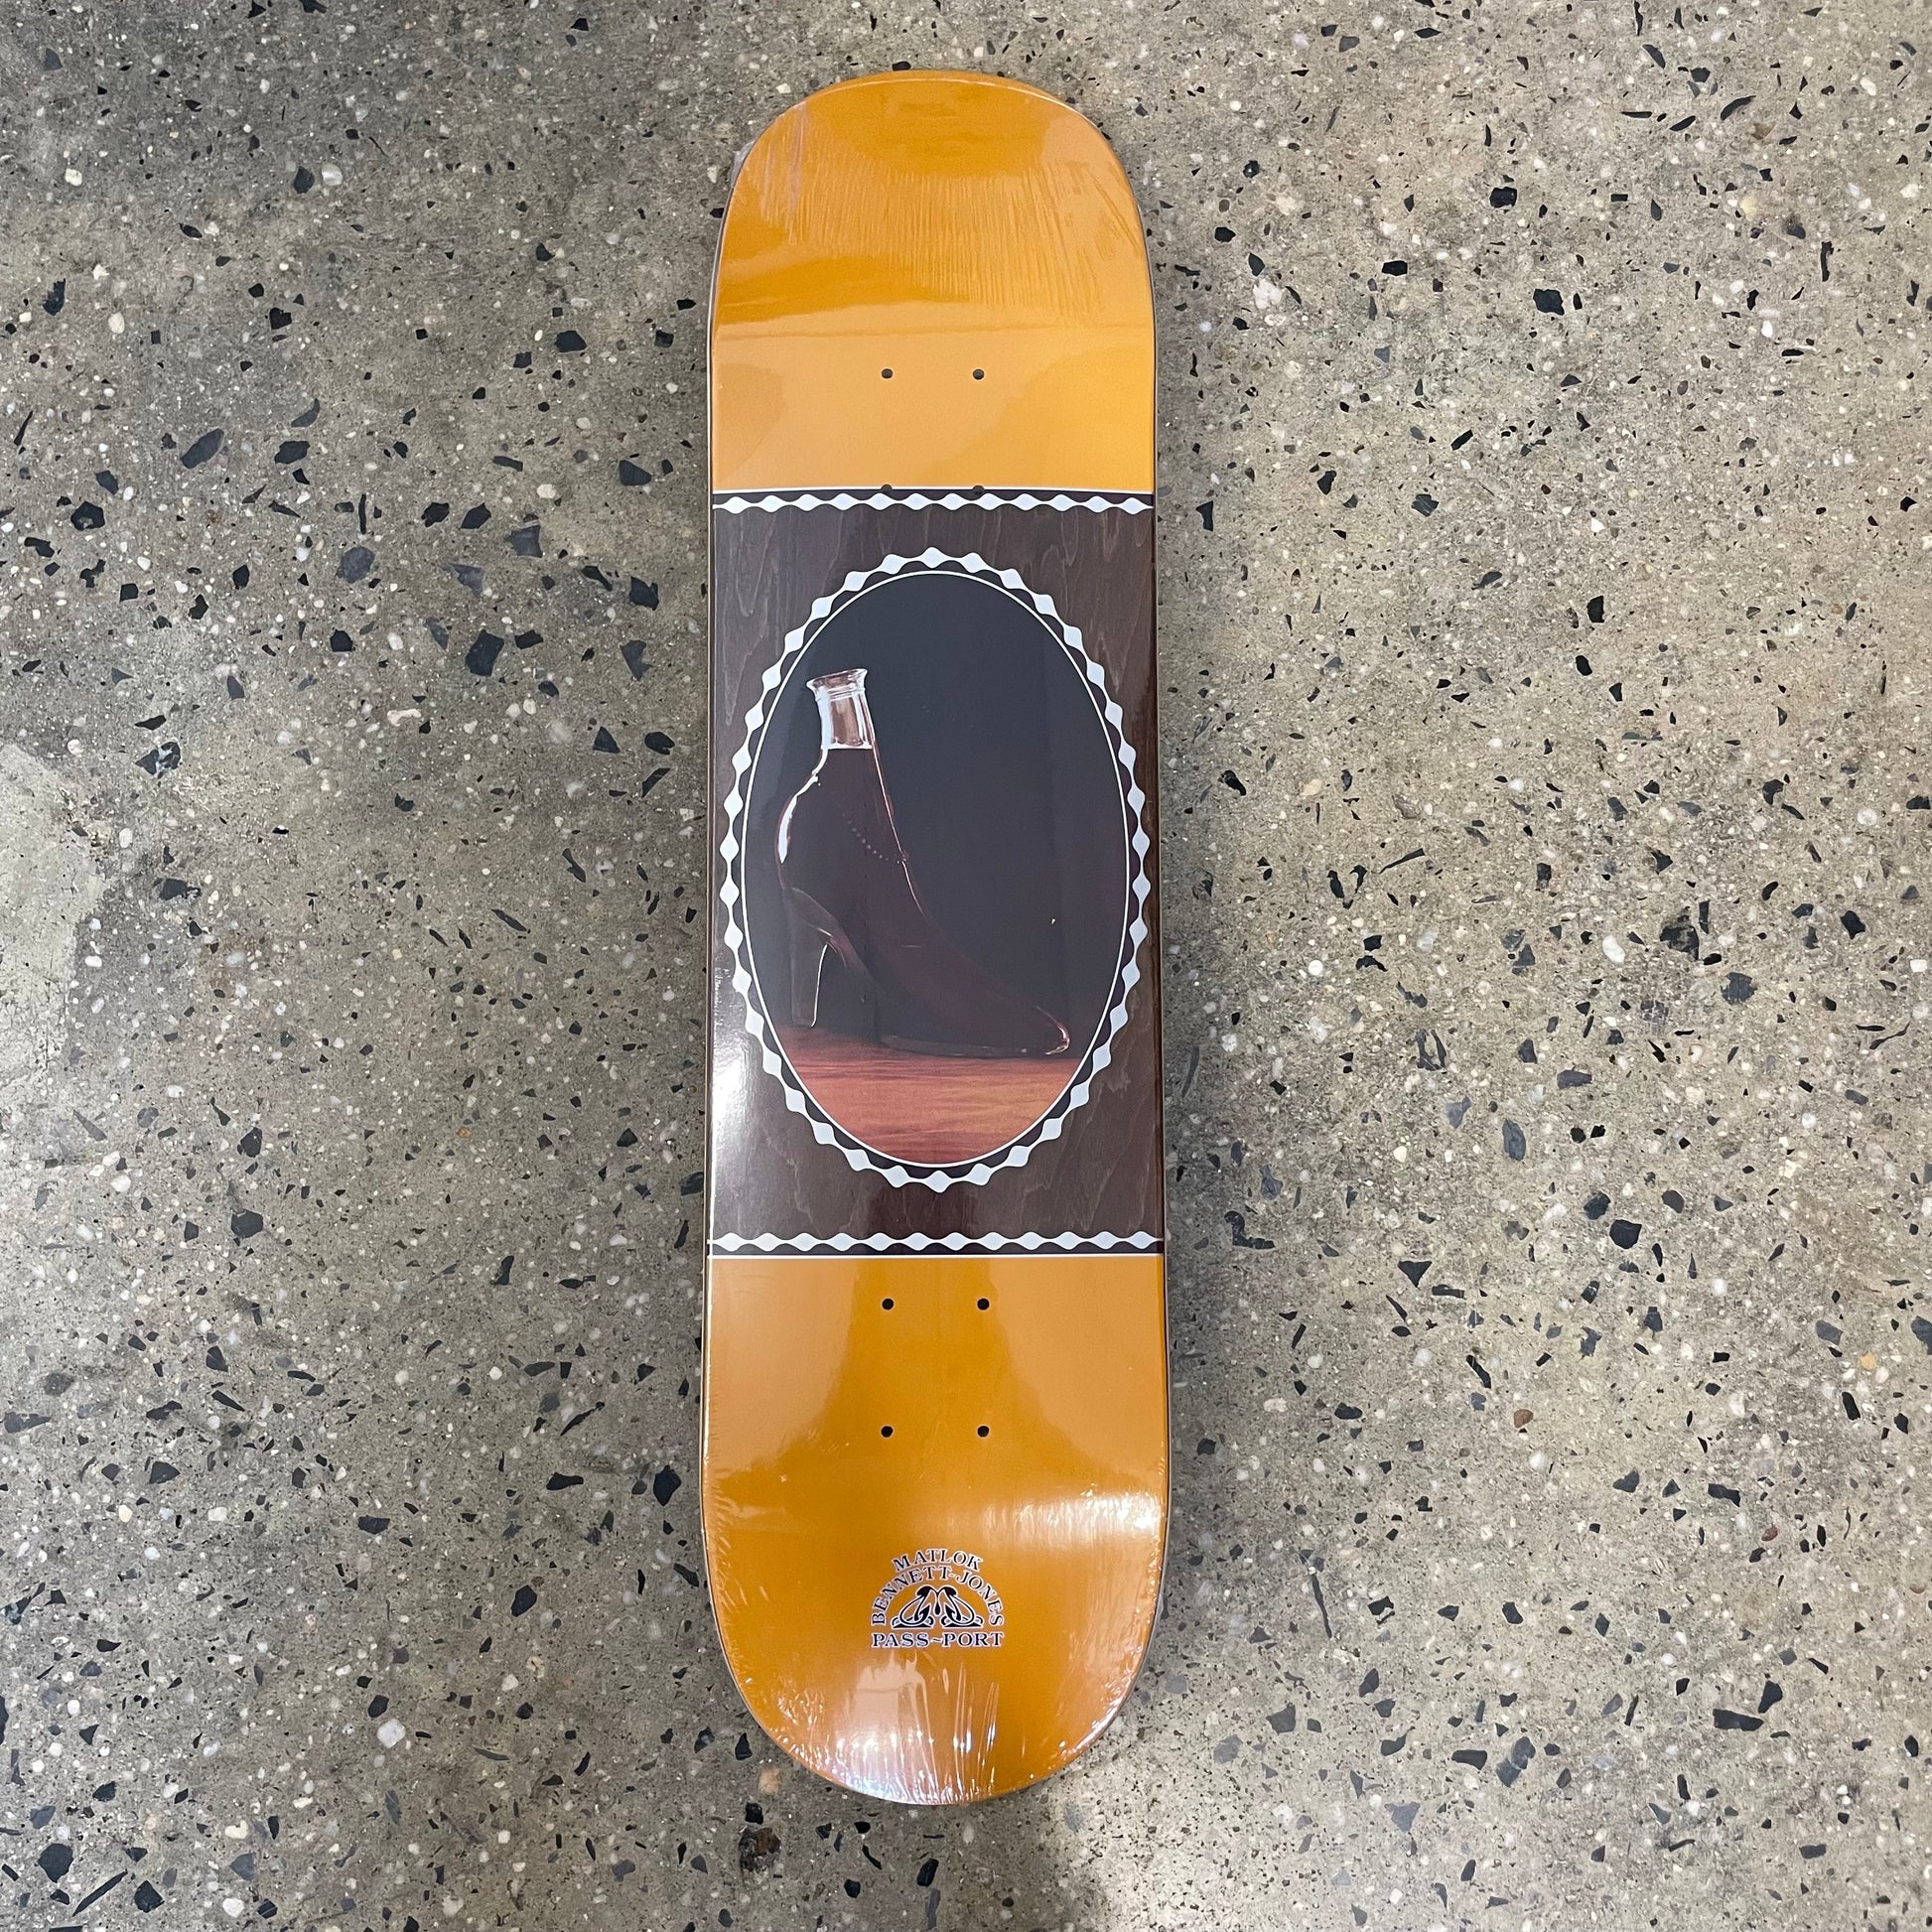 abstract design on yellow skate deck